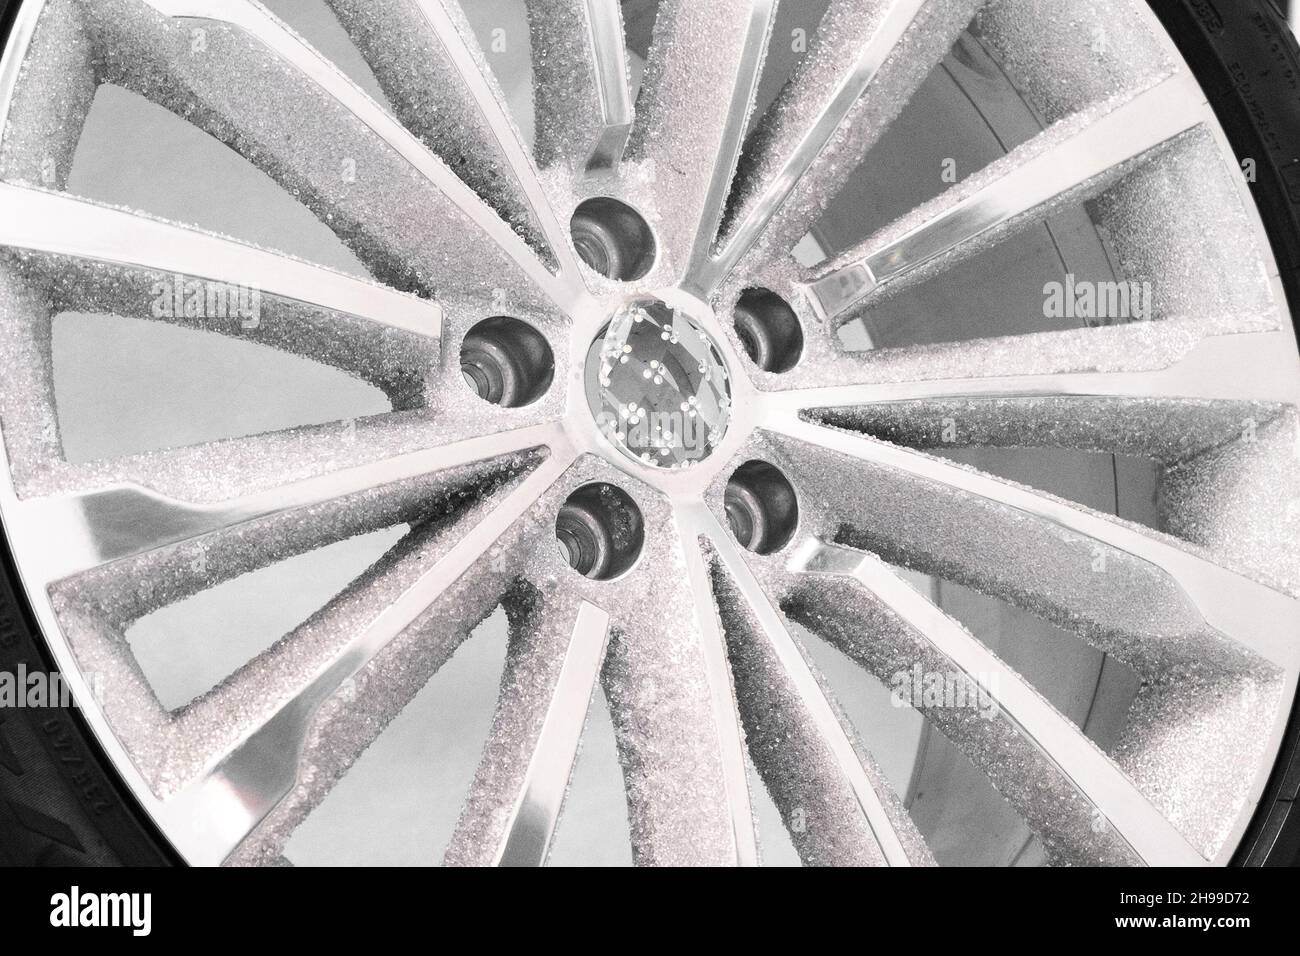 Inlaid with crystals stylish contemporary expensive shiny aluminum wheel disk demonstrated at exhibition extreme close view Stock Photo